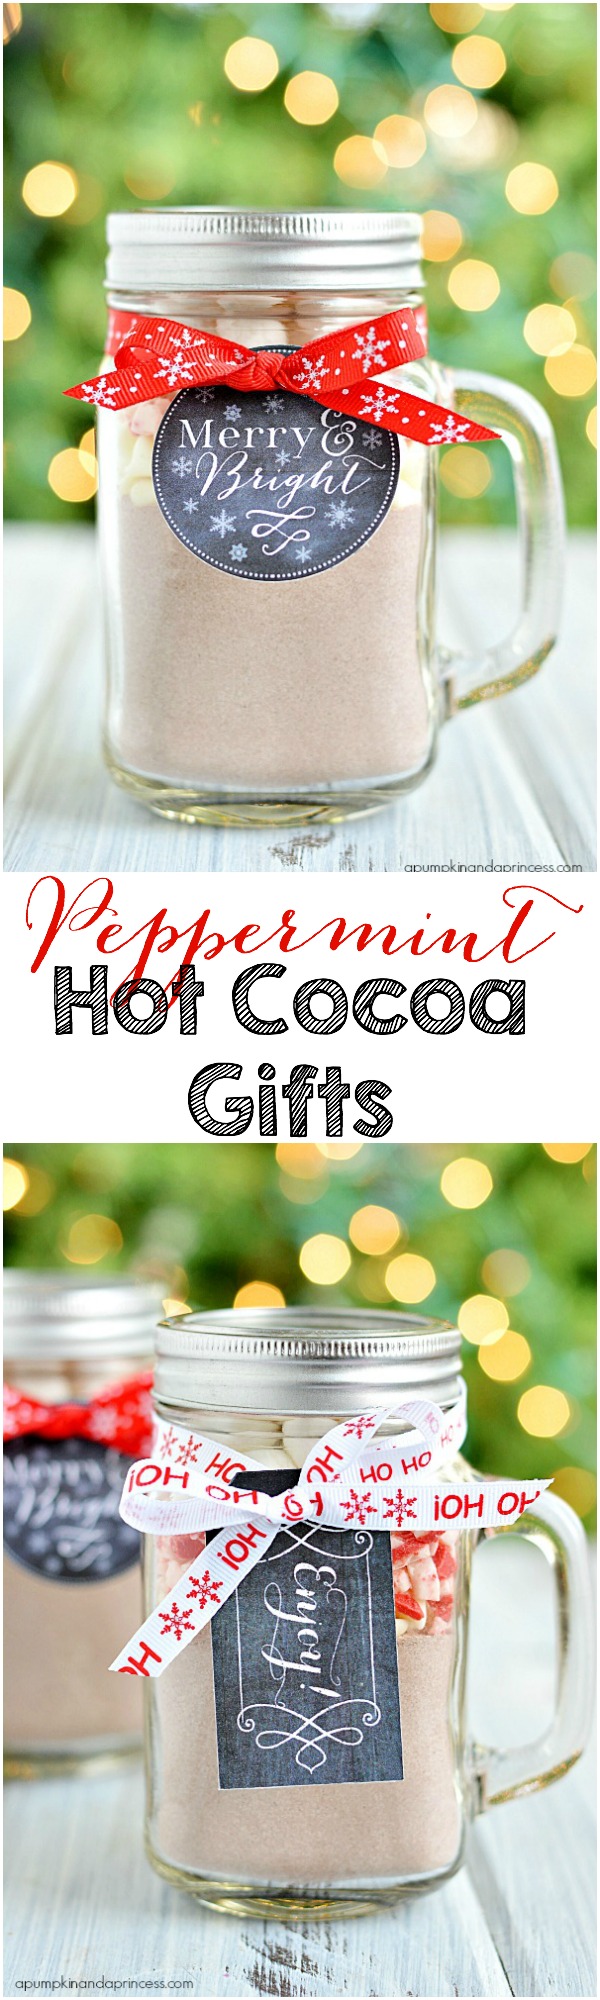 Peppermint-Hot-Cocoa-Gifts